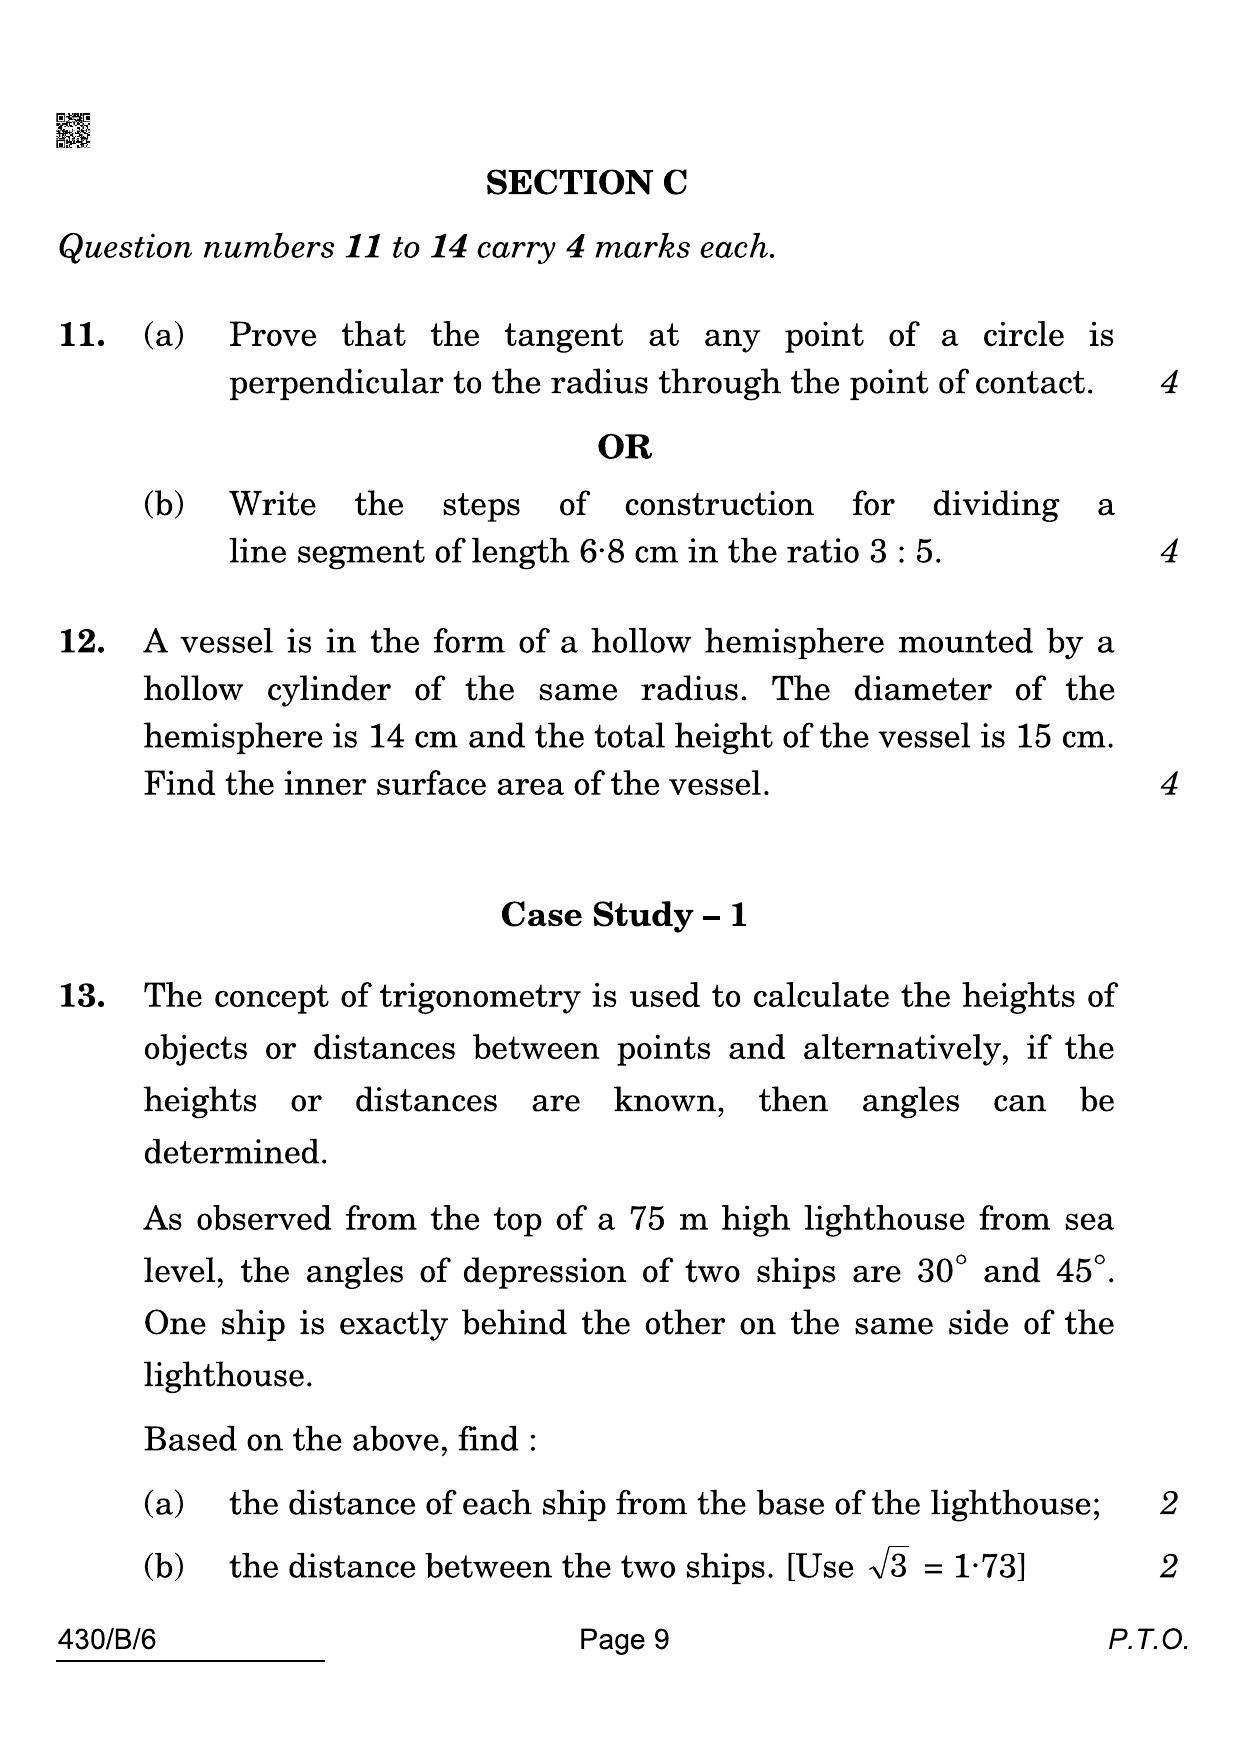 CBSE Class 10 430-B-6 Maths Basic Blind 2022 Compartment Question Paper - Page 9